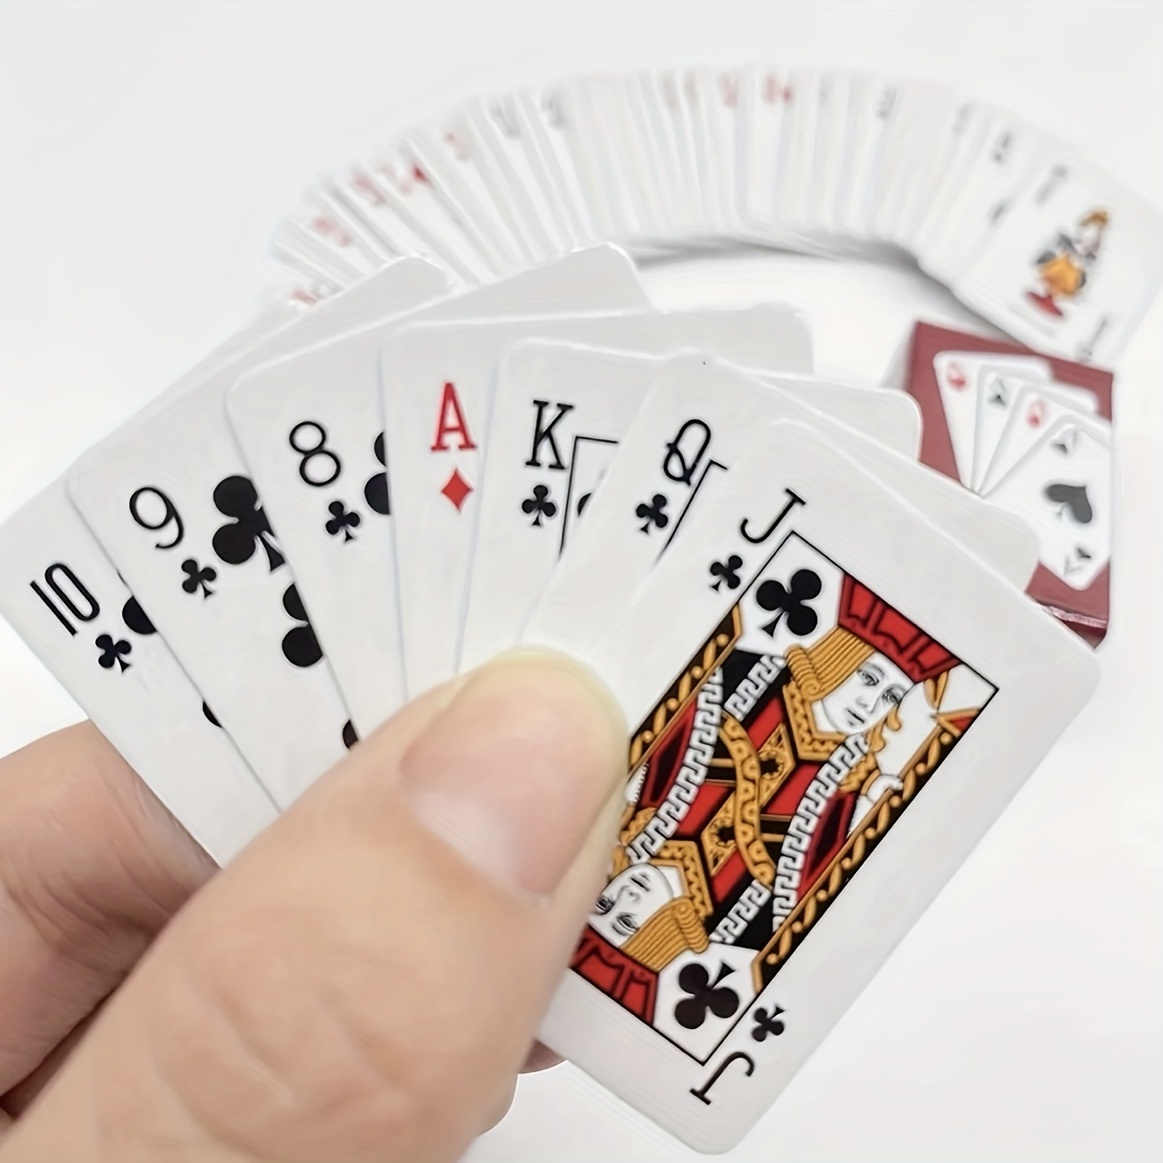 Playing Poker Cards Portable Mini Small Poker Interesting Playing